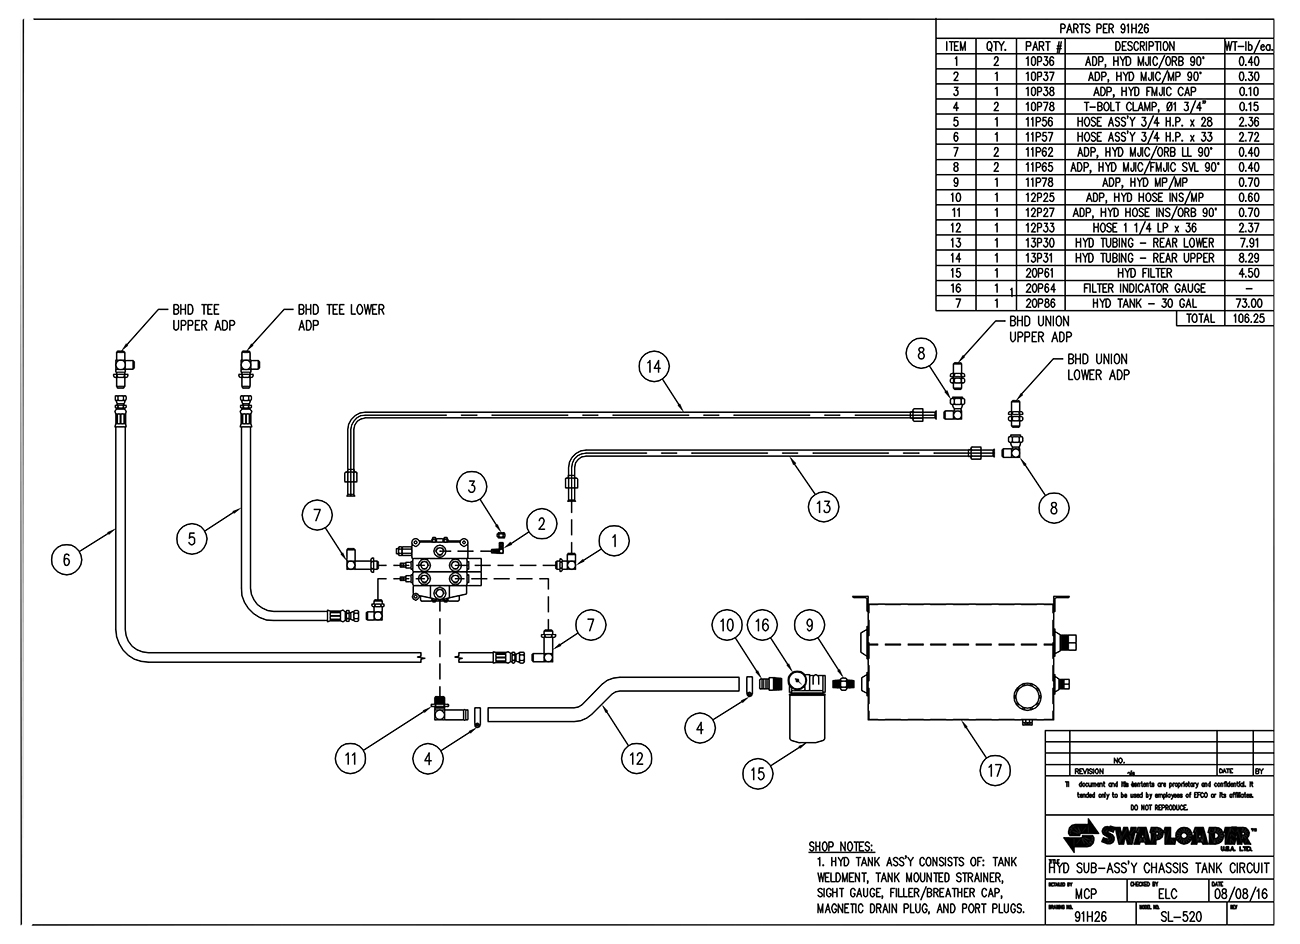 SL-520 Hydraulic Sub-Assembly Chassis Tank Circuit Diagram